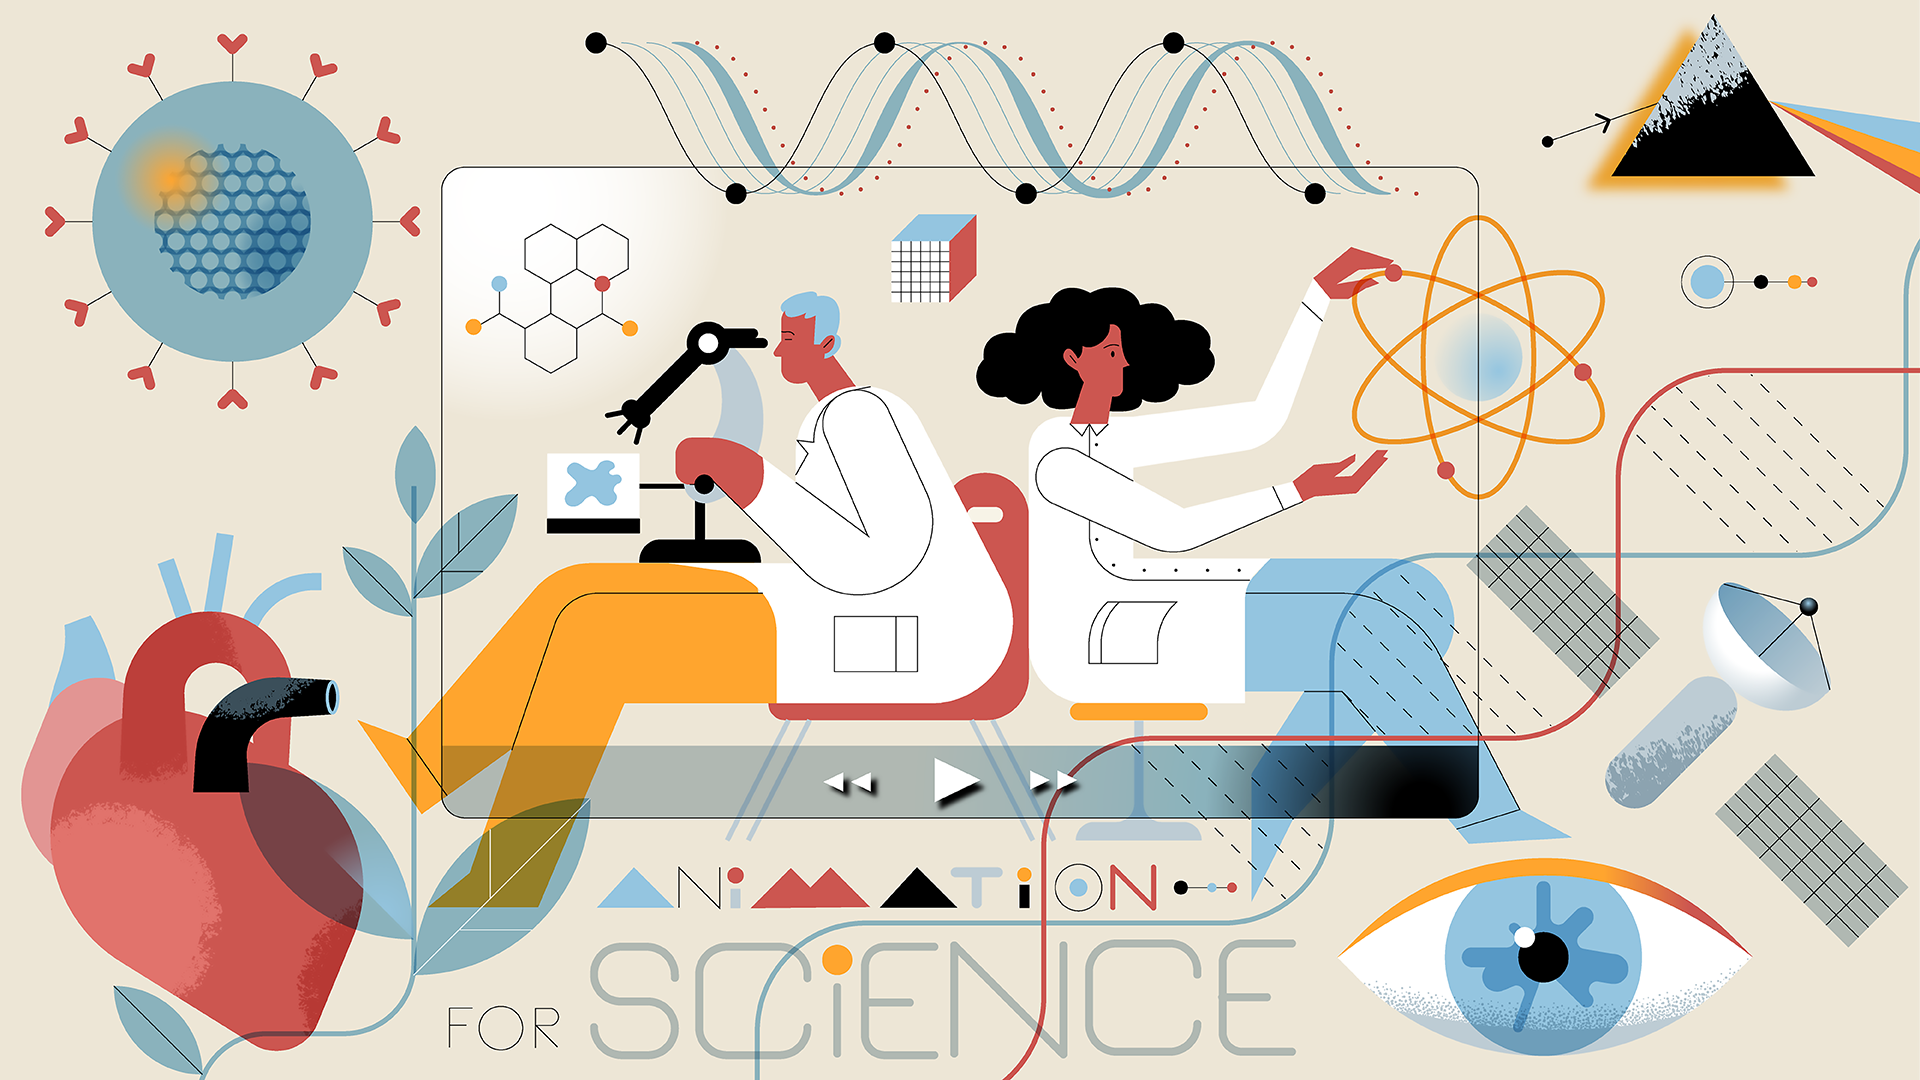 <p>Animation for Science Communication</p>
